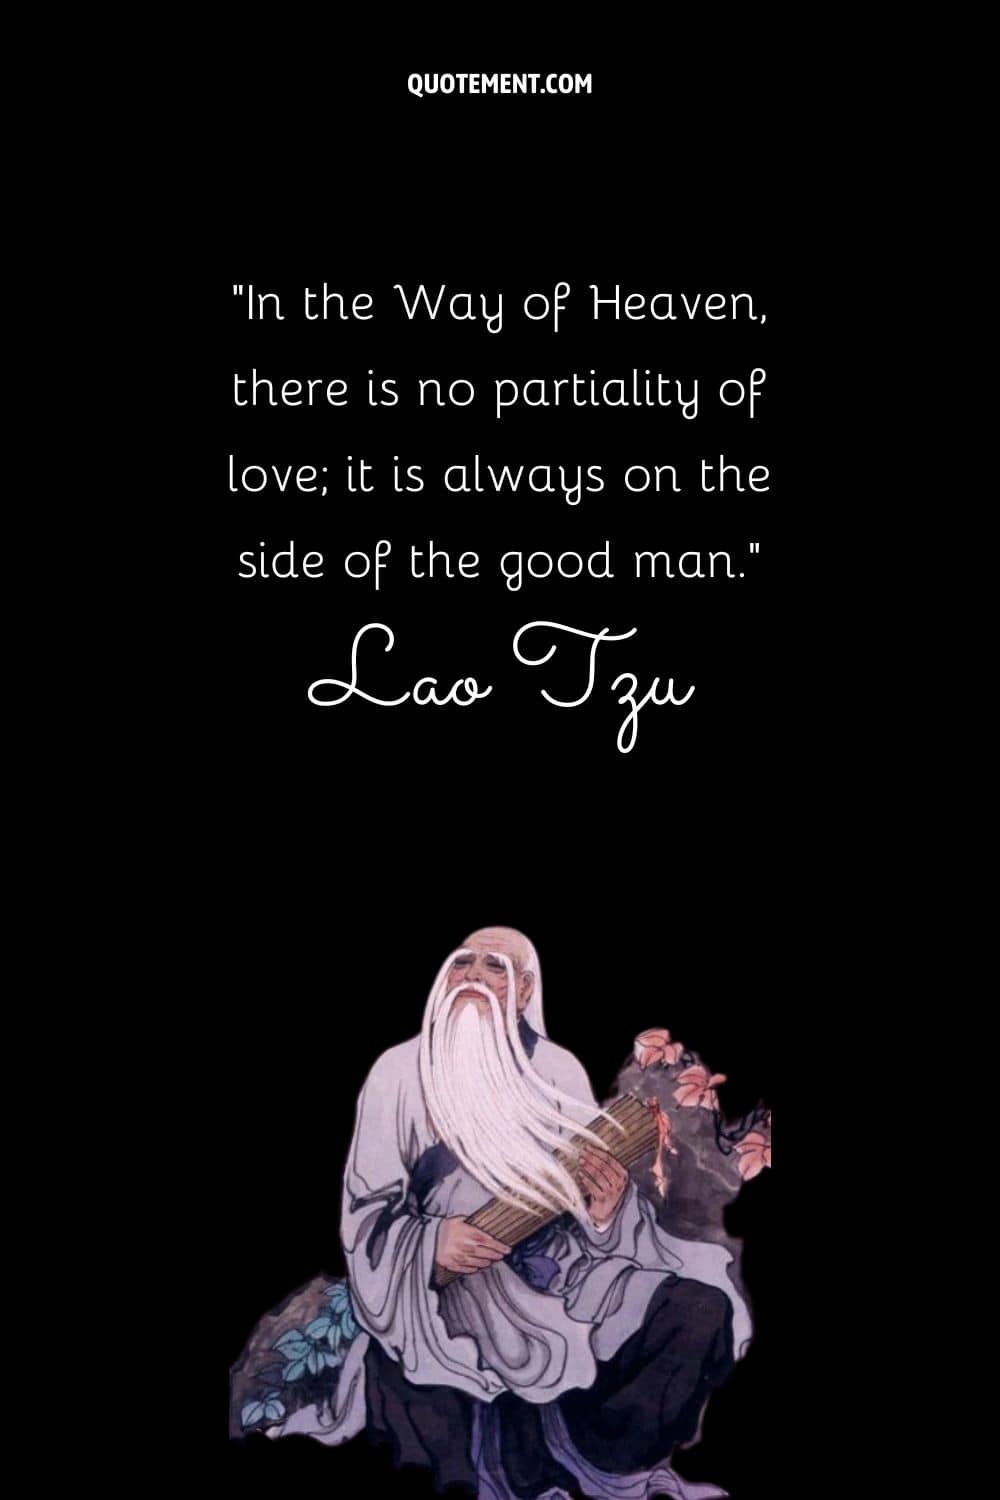 In the Way of Heaven, there is no partiality of love; it is always on the side of the good man.